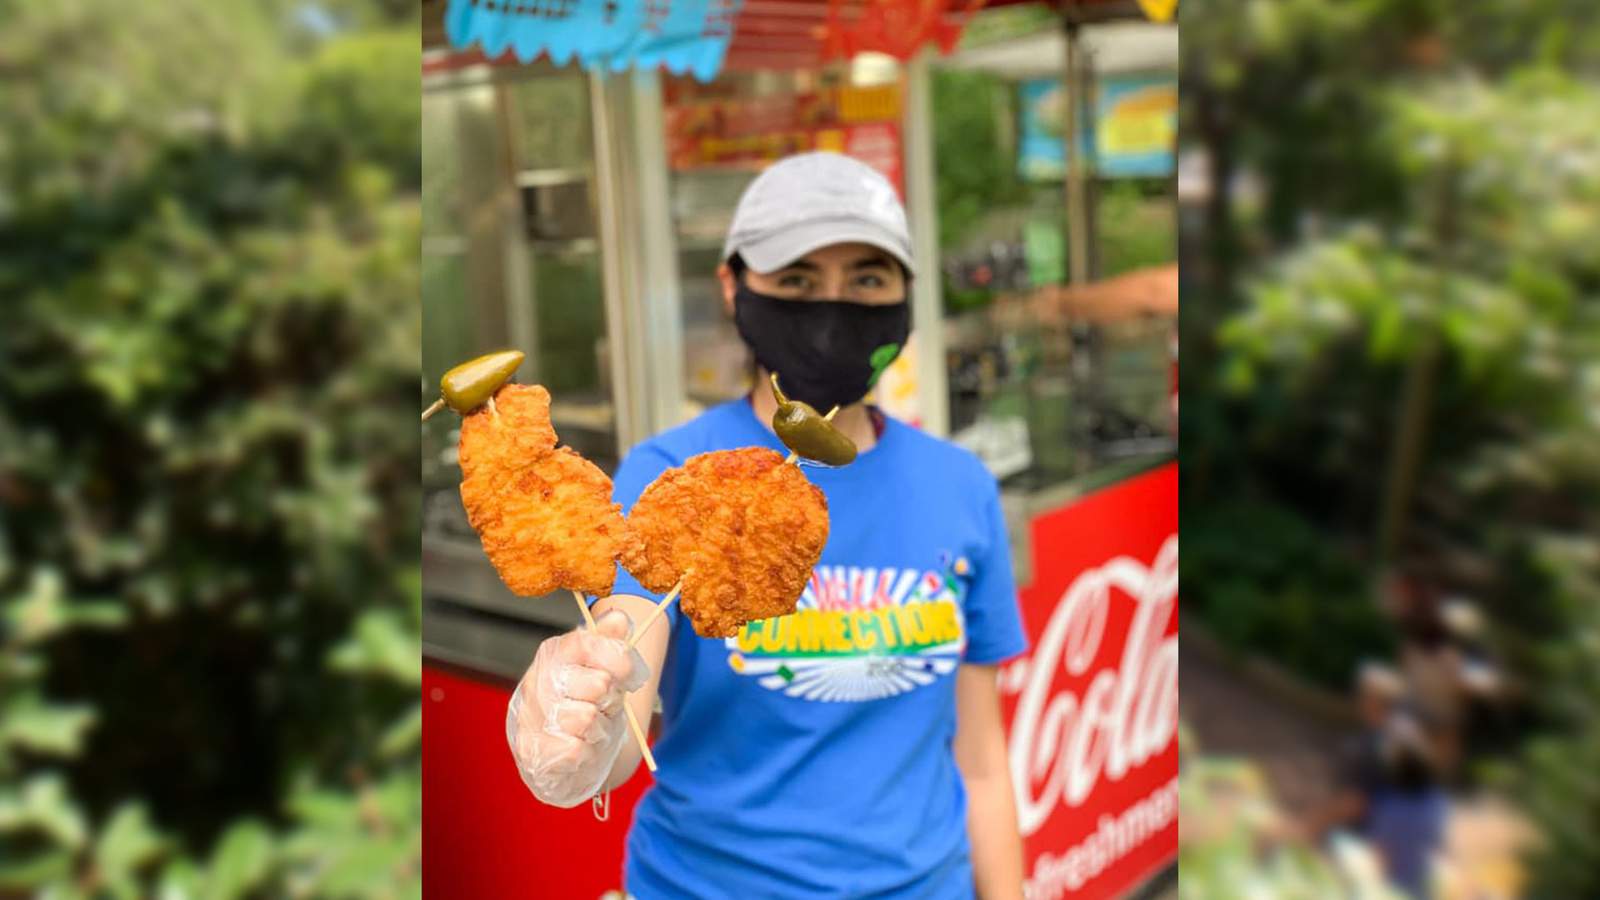 'On a Stick!’ festival at San Antonio Zoo will celebrate all the festivals you missed in 2020